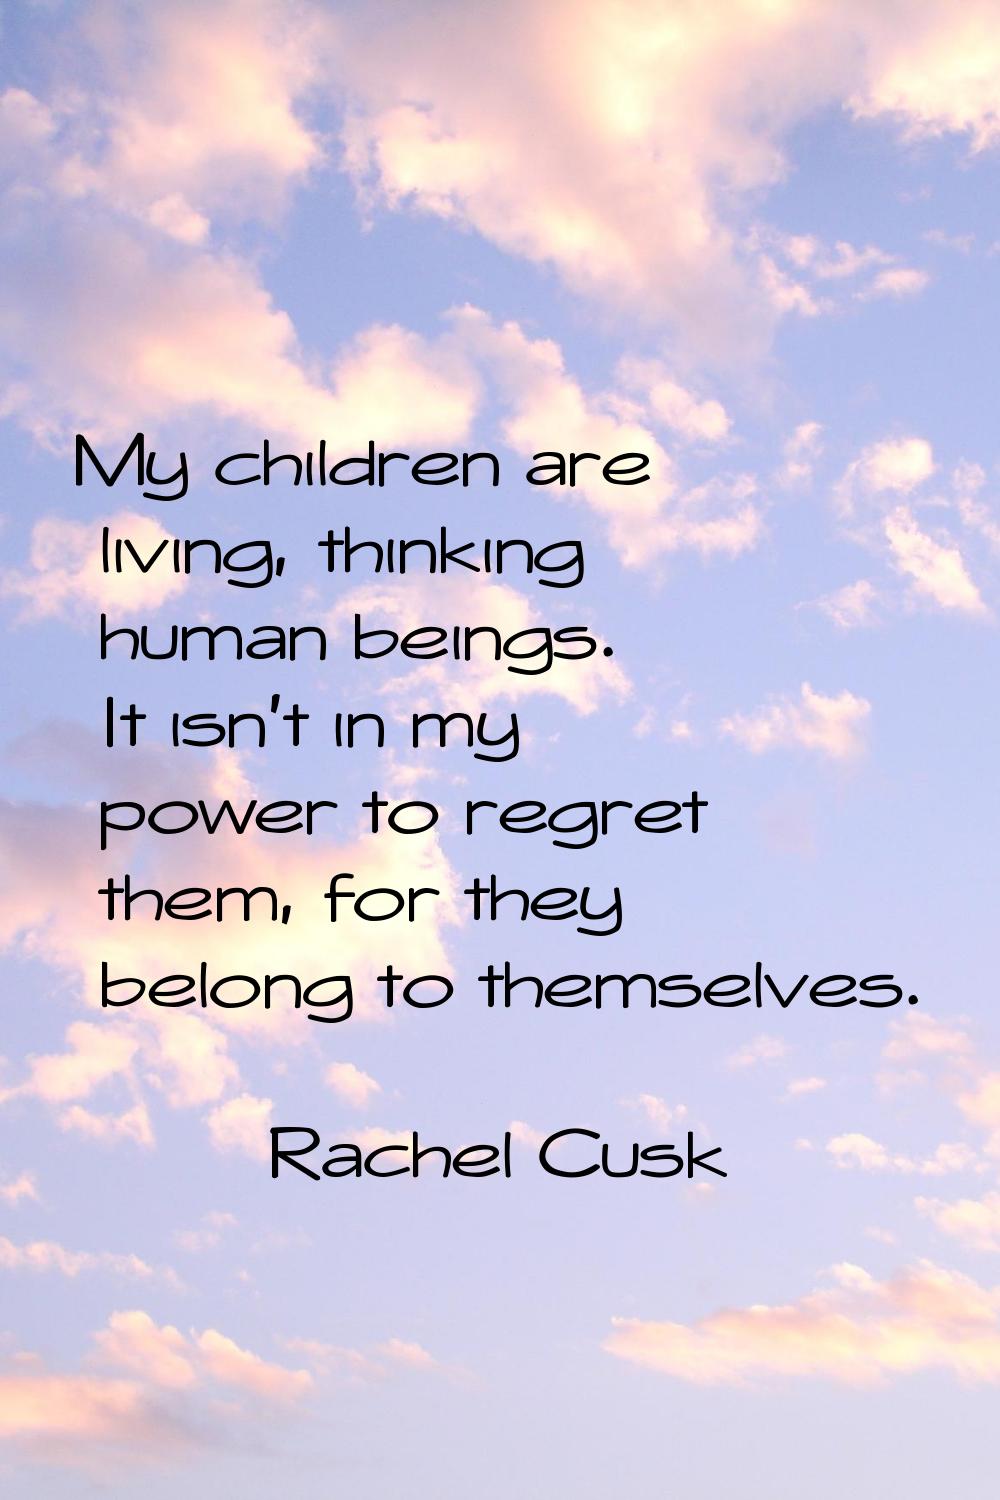 My children are living, thinking human beings. It isn't in my power to regret them, for they belong